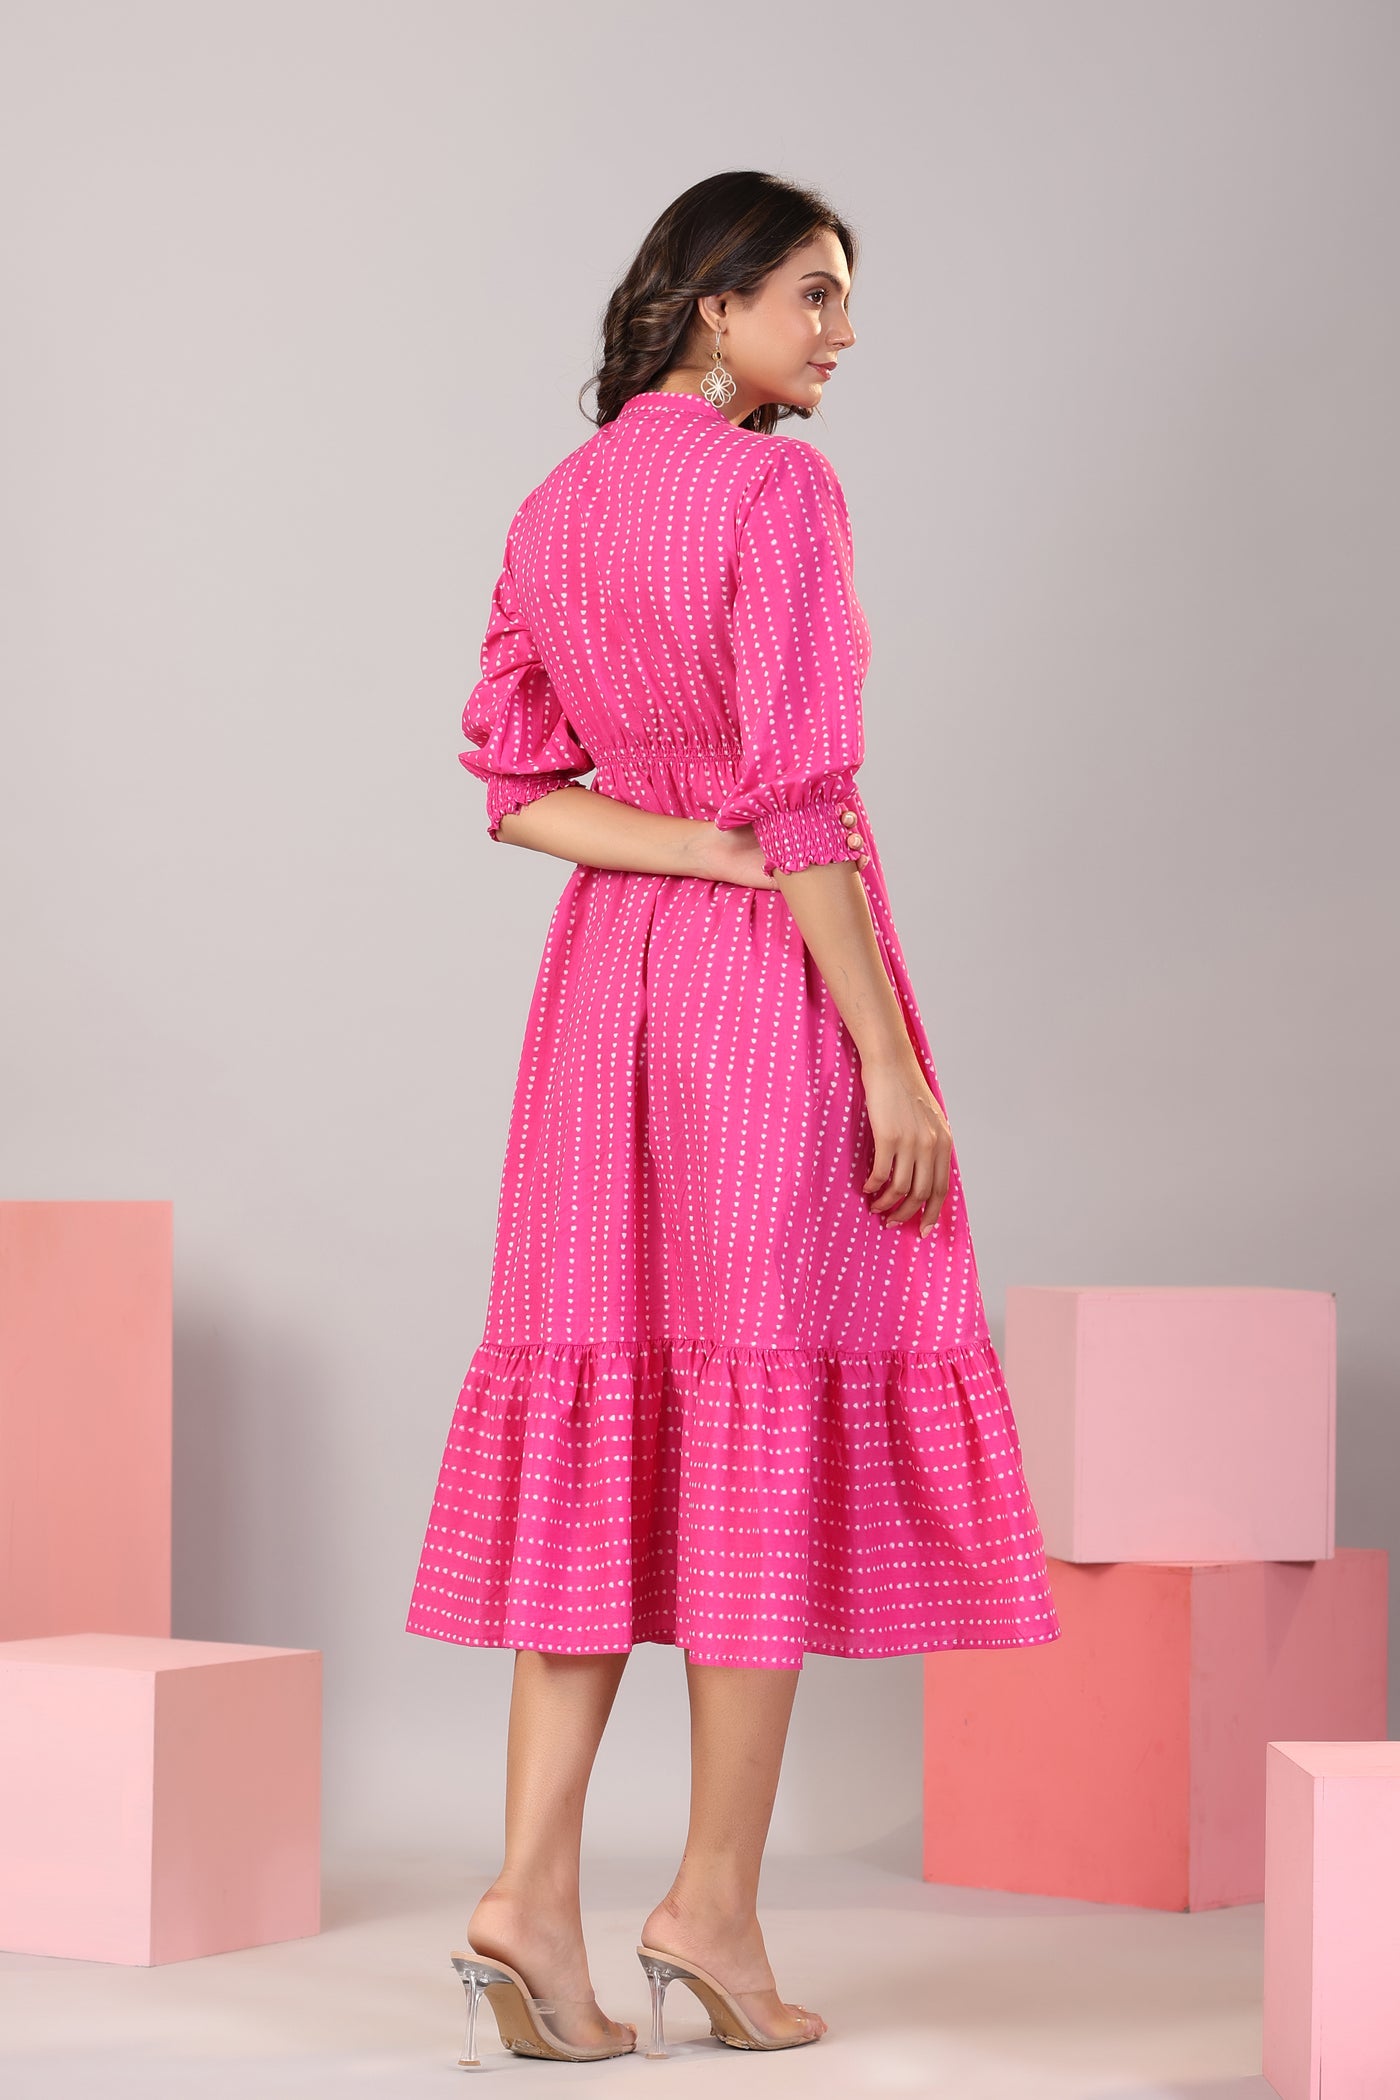 Dotted parallels on Pink Cotton MIDI Dress